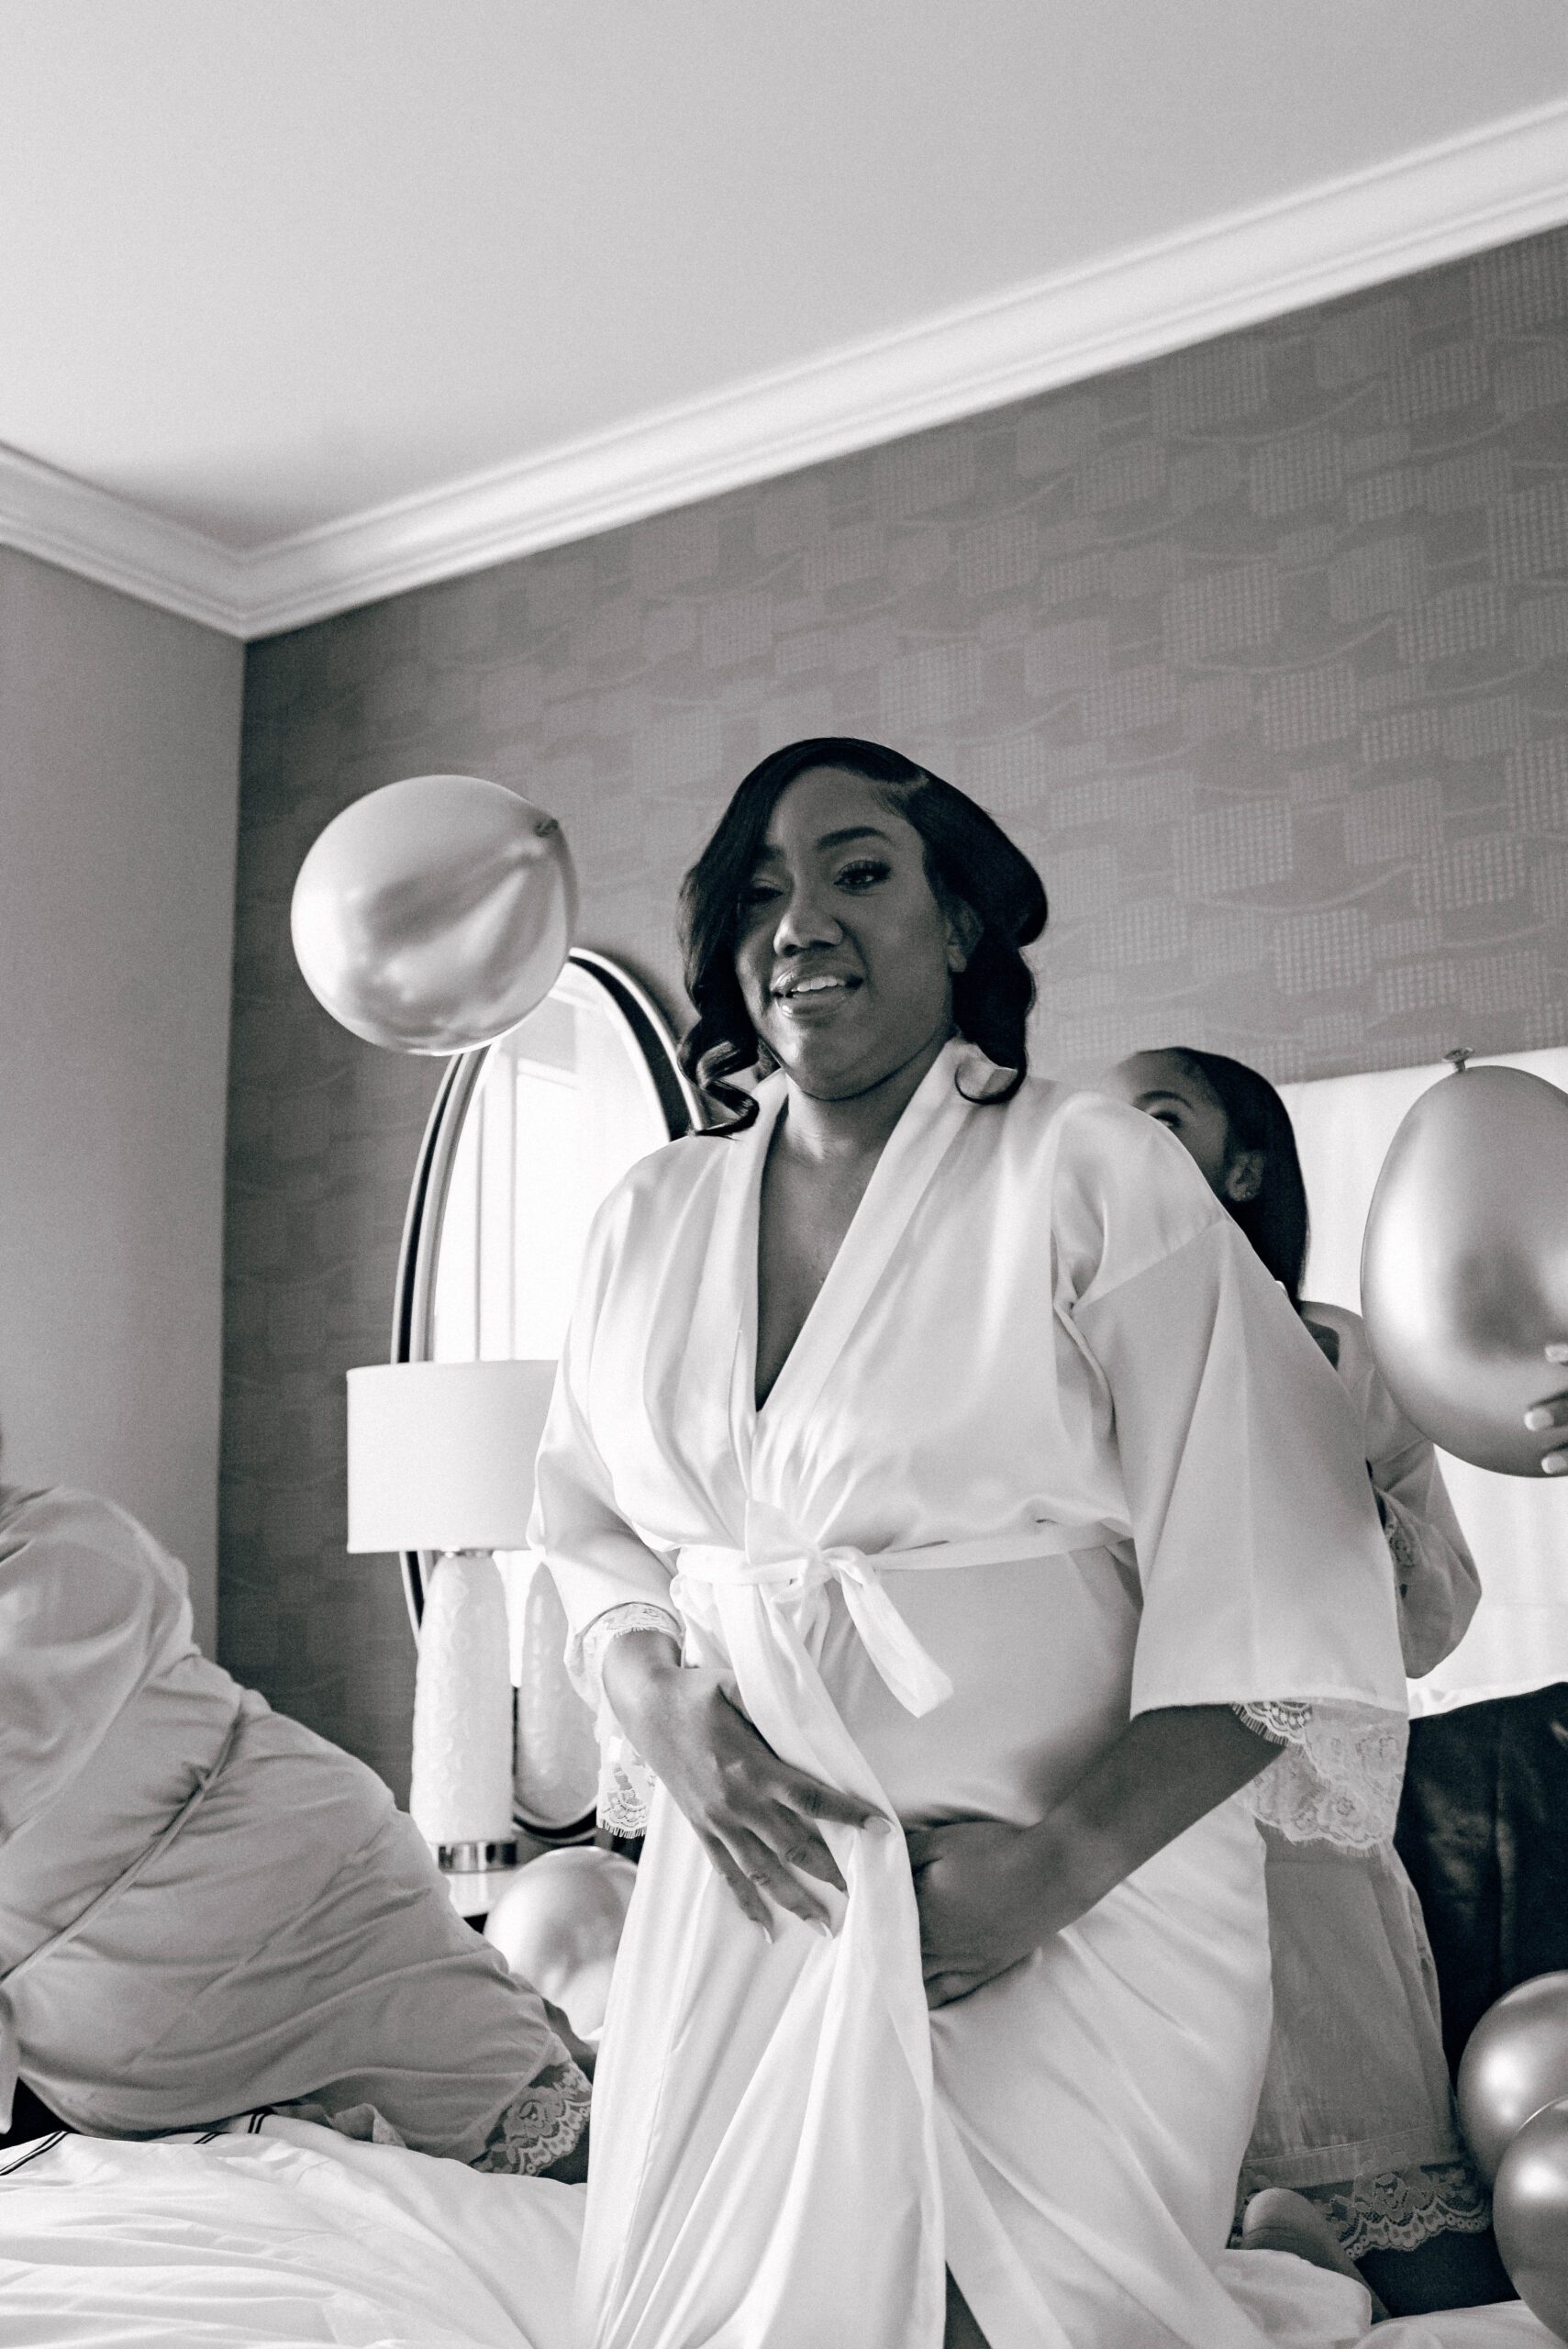 Bride and bridesmaids throwing balloons in hotel room in matching robes before getting ready for the wedding